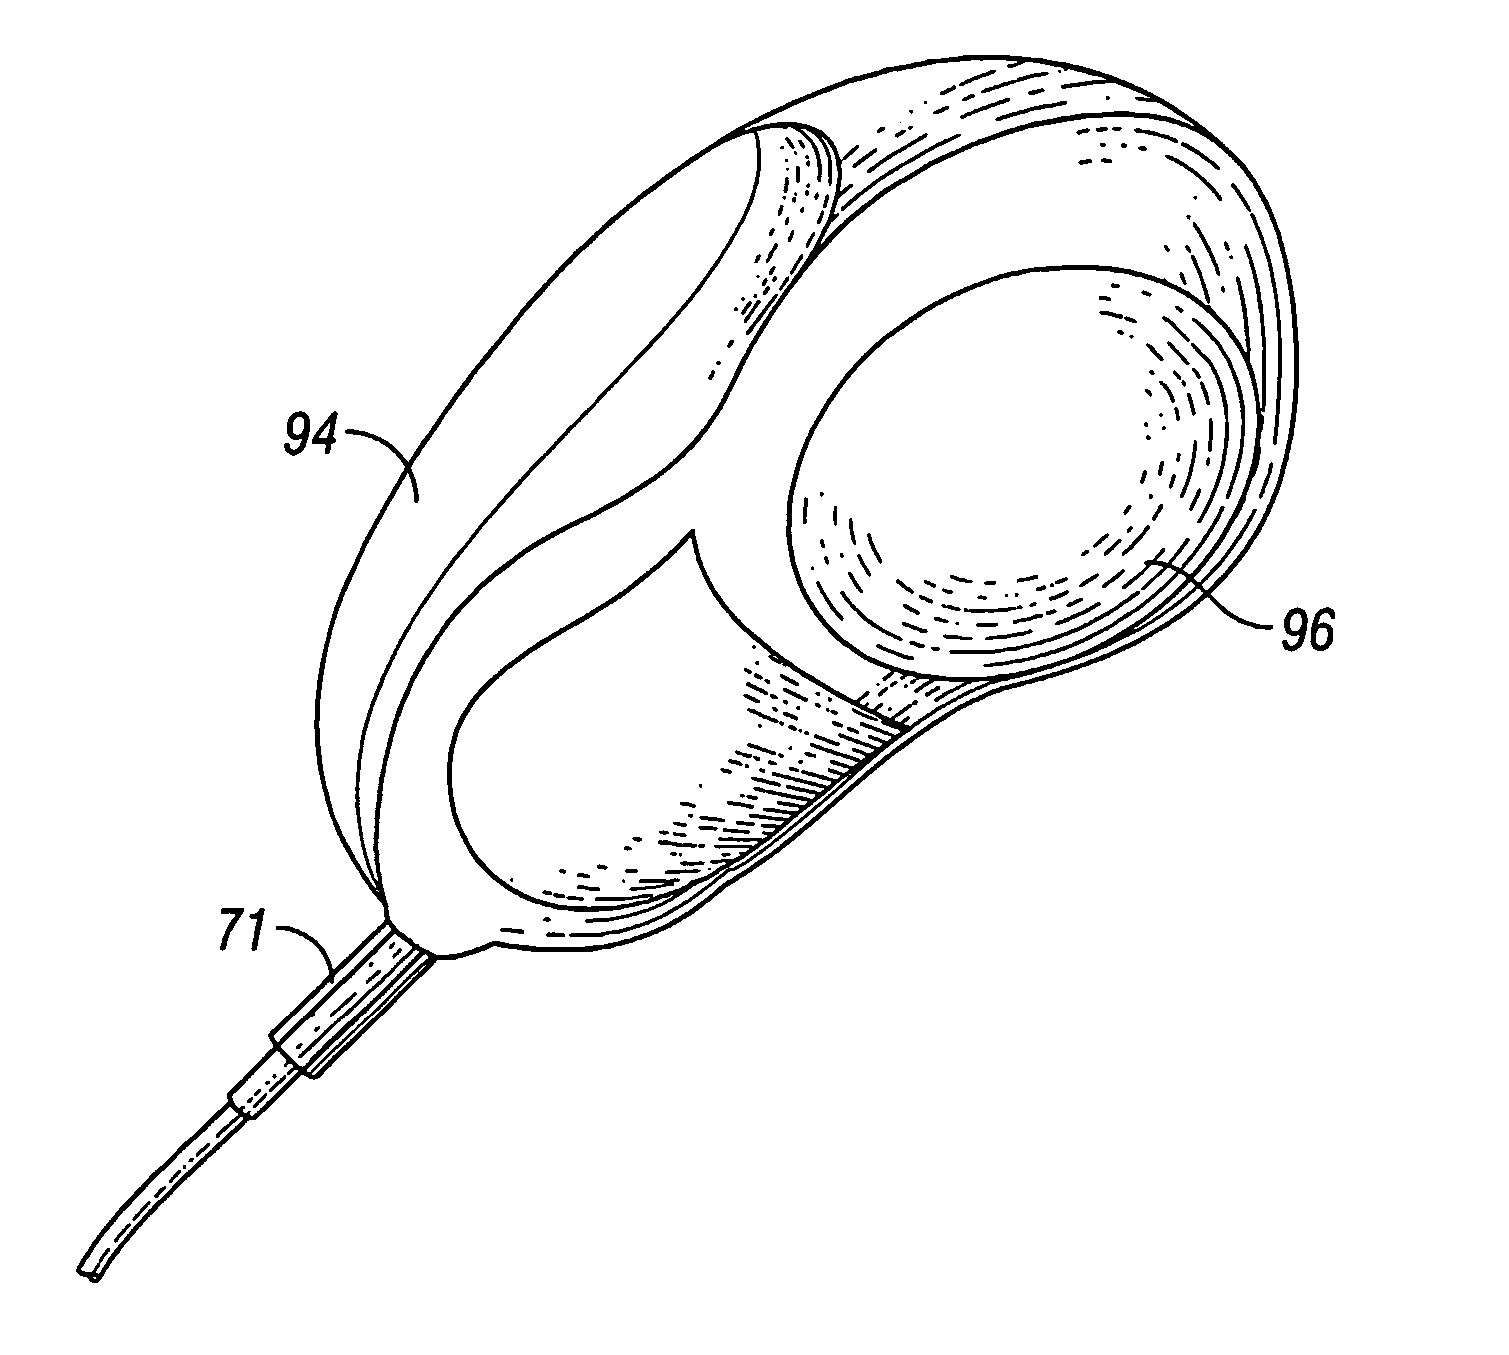 Bi-axial rotating magnetic therapeutic device